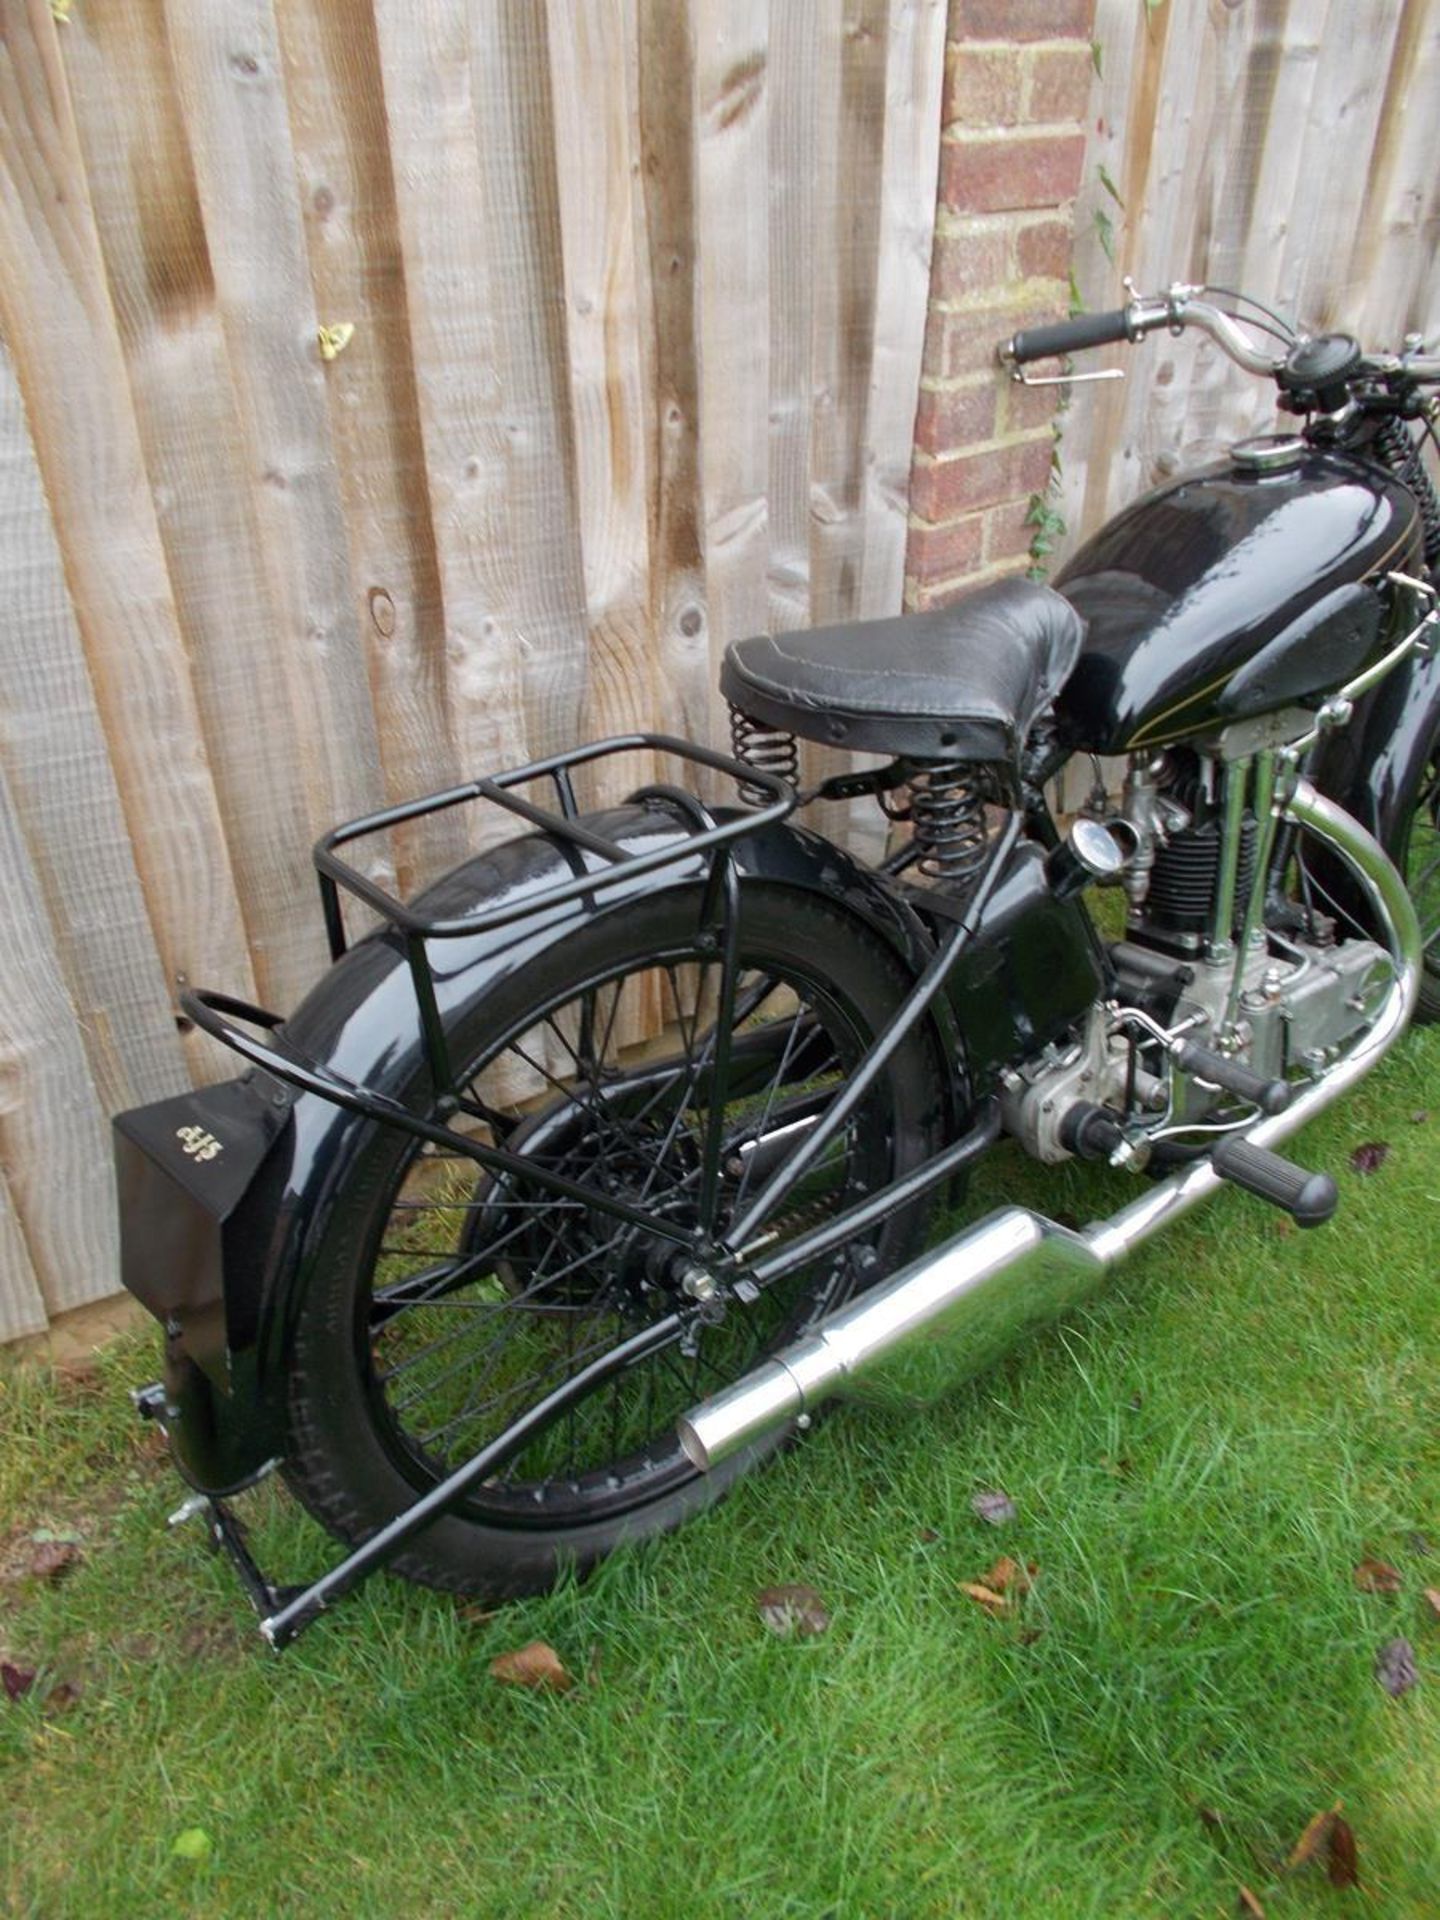 A 1930 AJS R12 250 Frame number R12?13750 Engine number R12?137507 Crankcase numbers 2665 Restored - Image 5 of 7